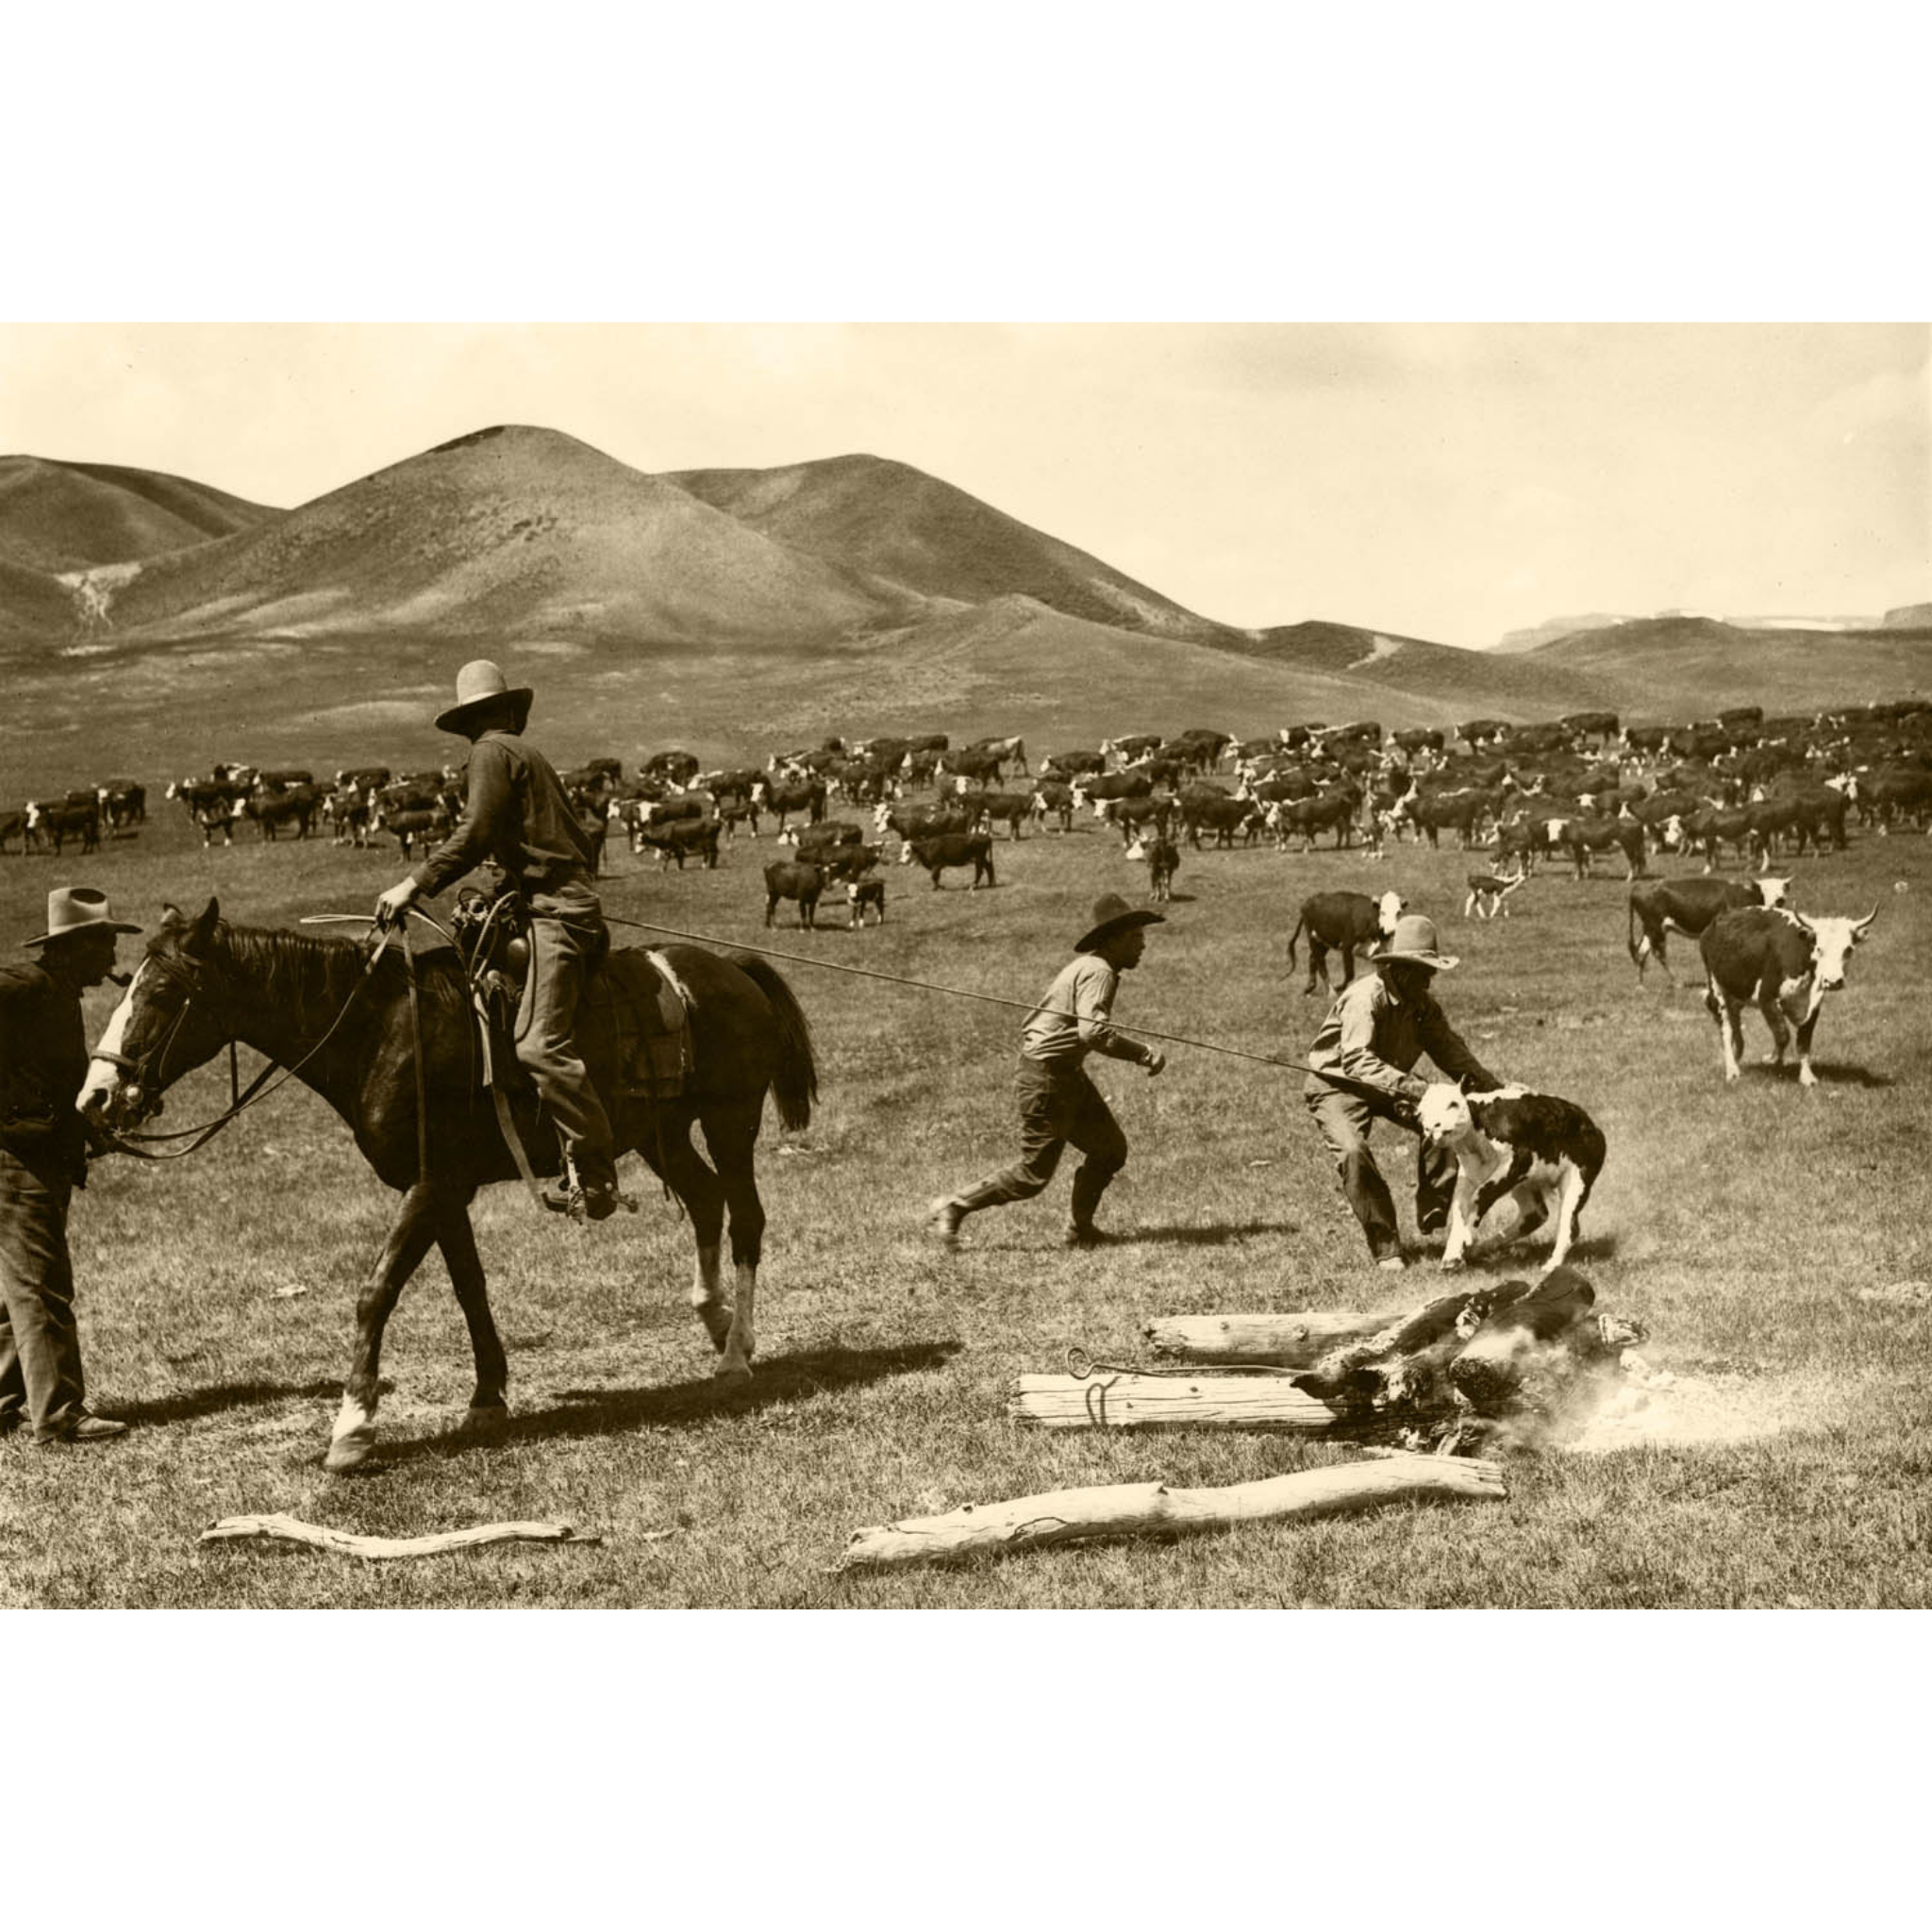 Branding Cattle in the Big Horn Mountains - 1935 Charles Belden Photograph